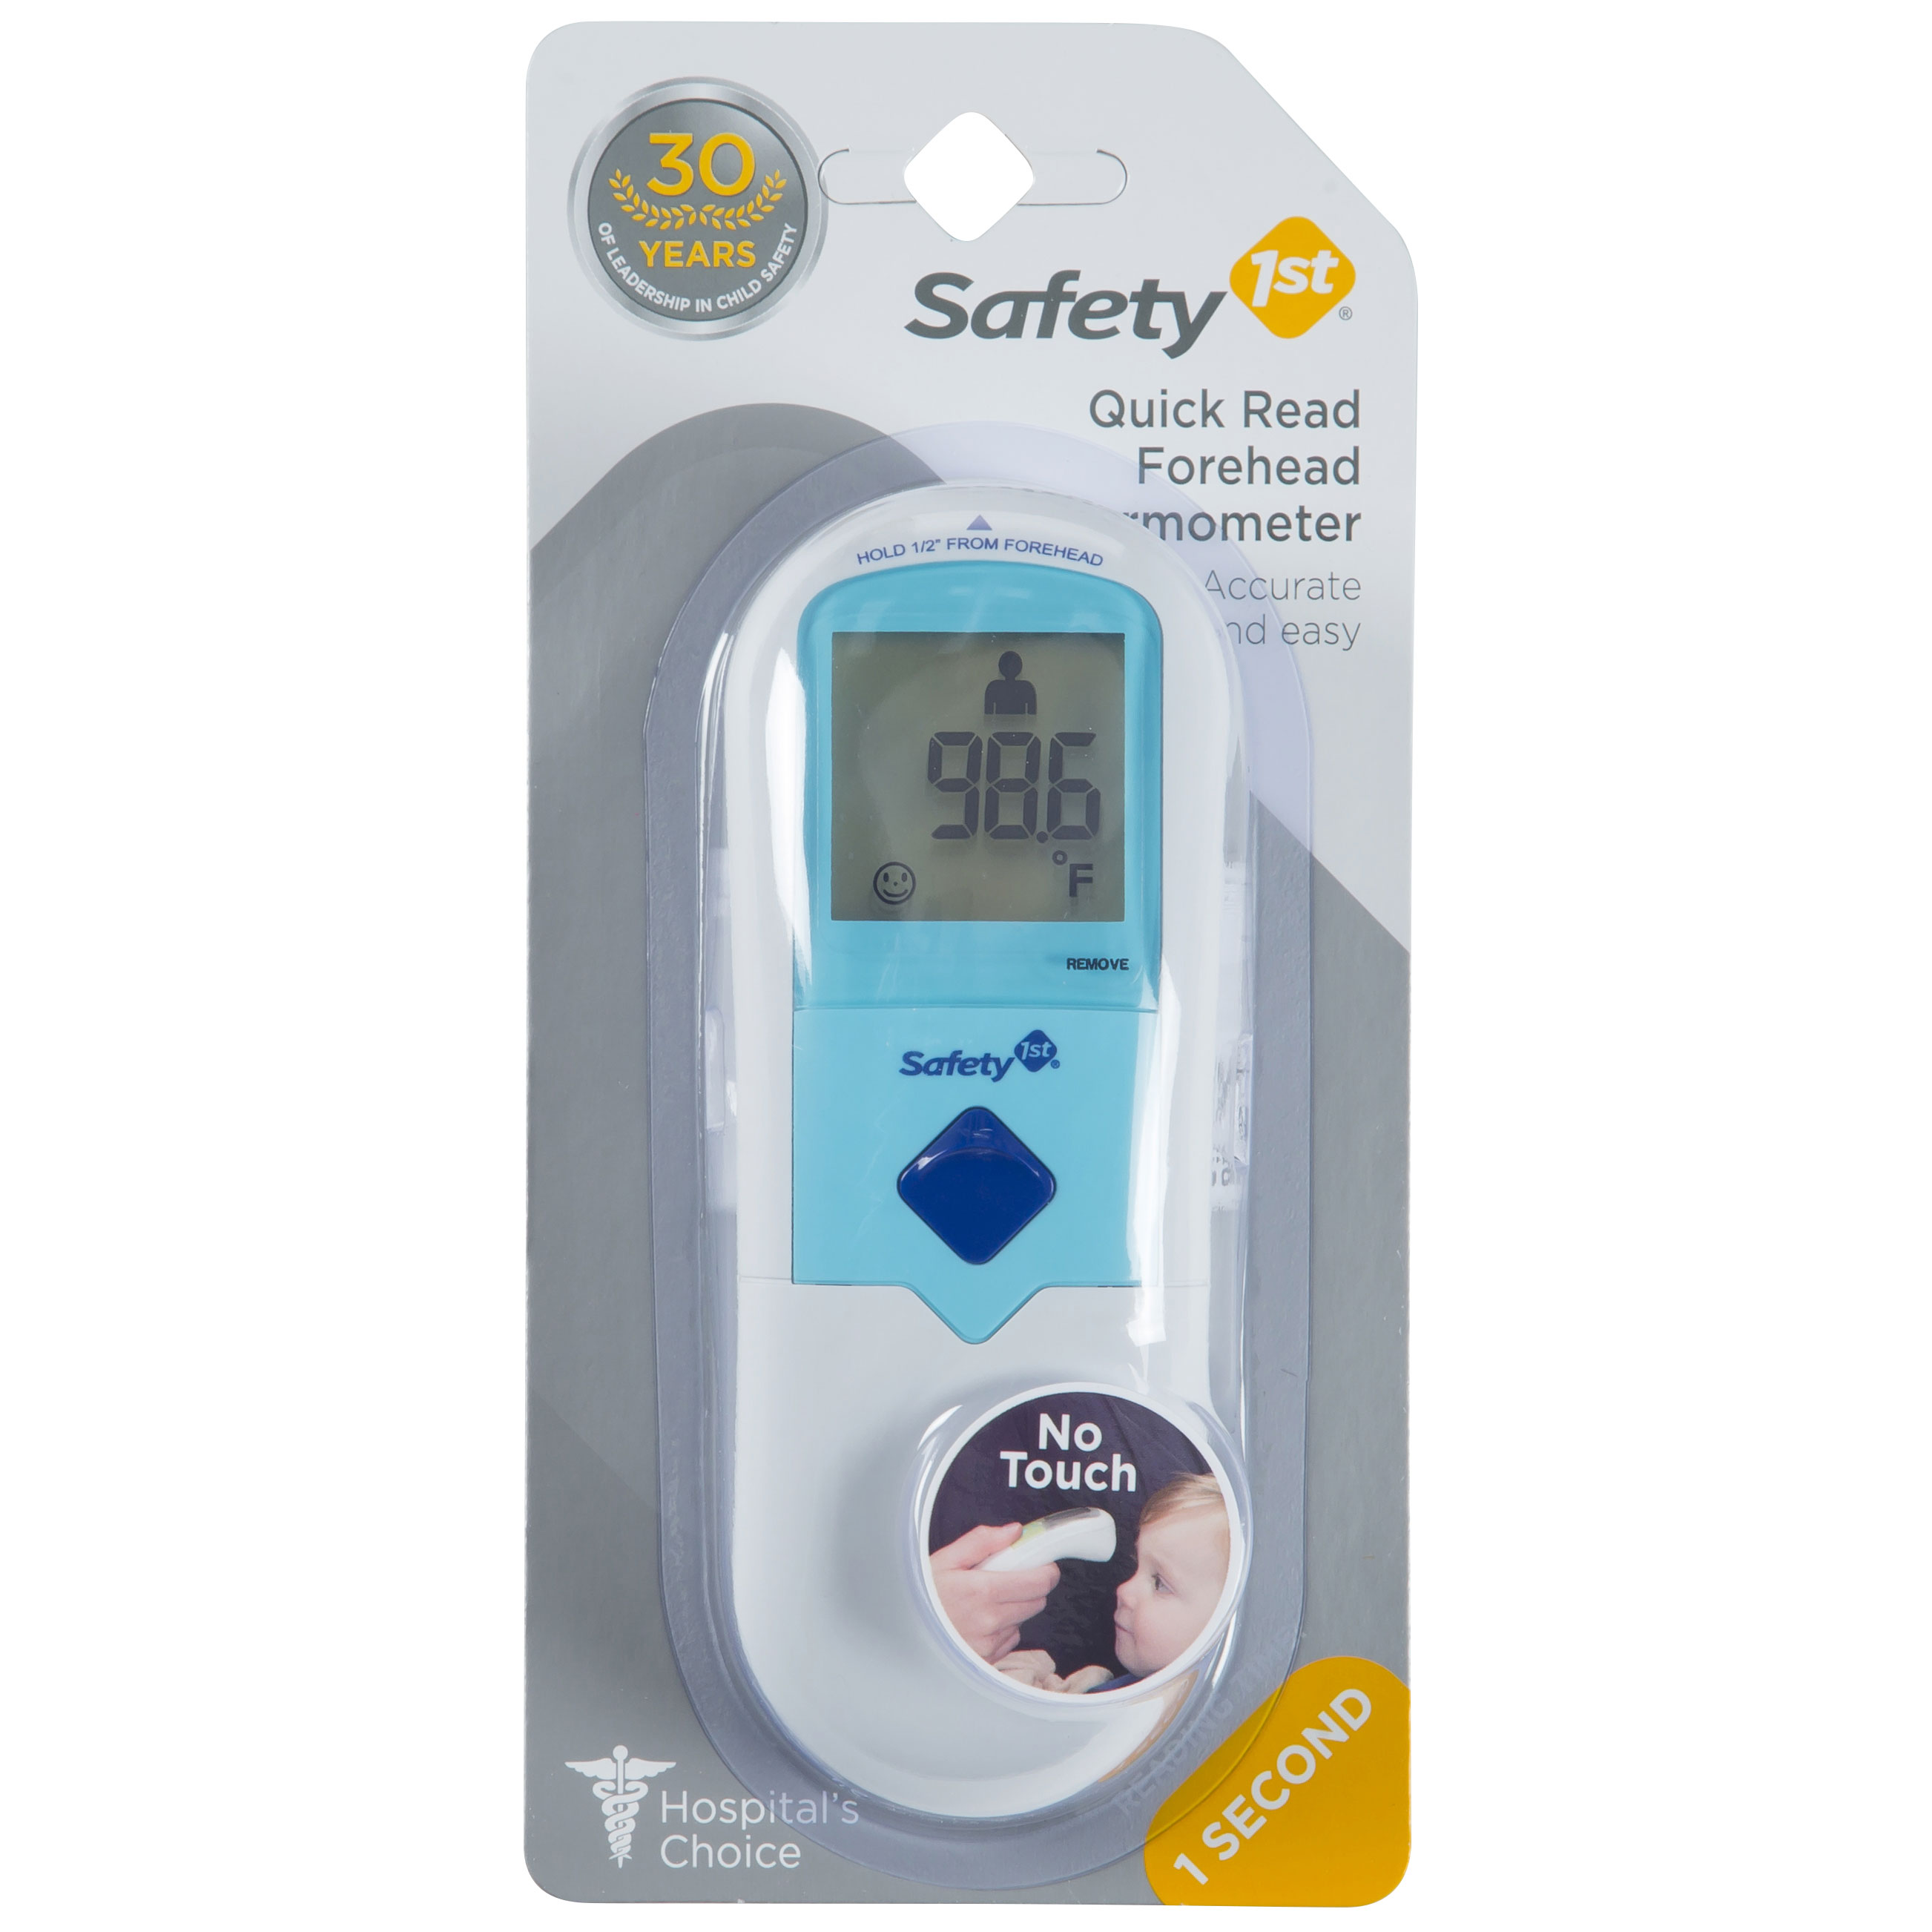 Buy Thermomètre frontal à lecture rapide de Safety 1st. for CAD 32.99 | Toys R Us Canada